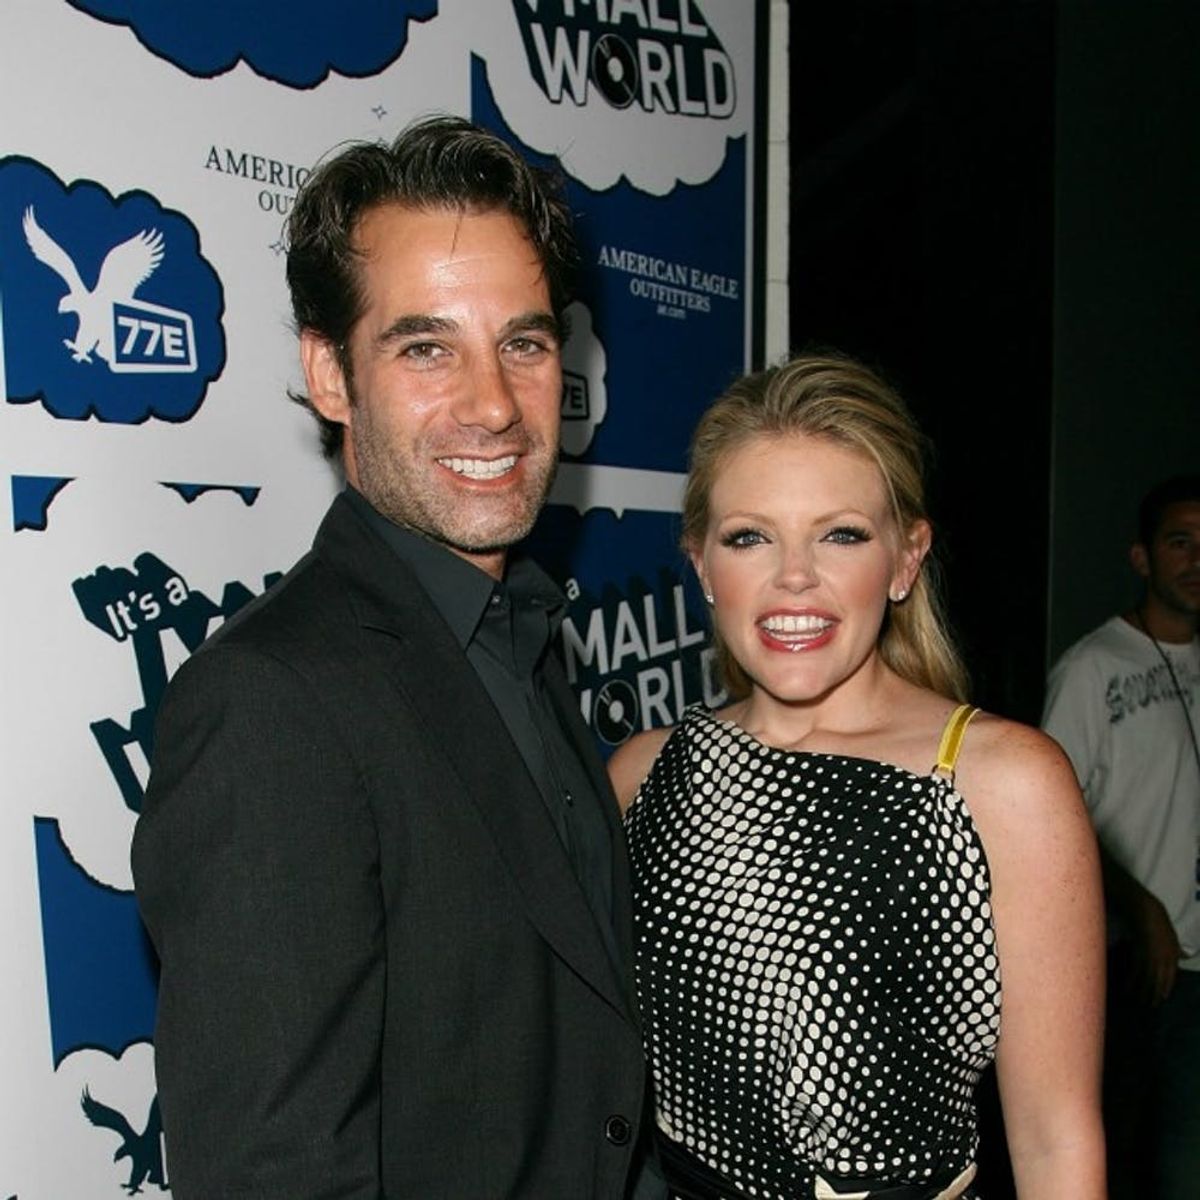 Natalie Maines of the Dixie Chicks Has Filed for Divorce After 17 Years of Marriage